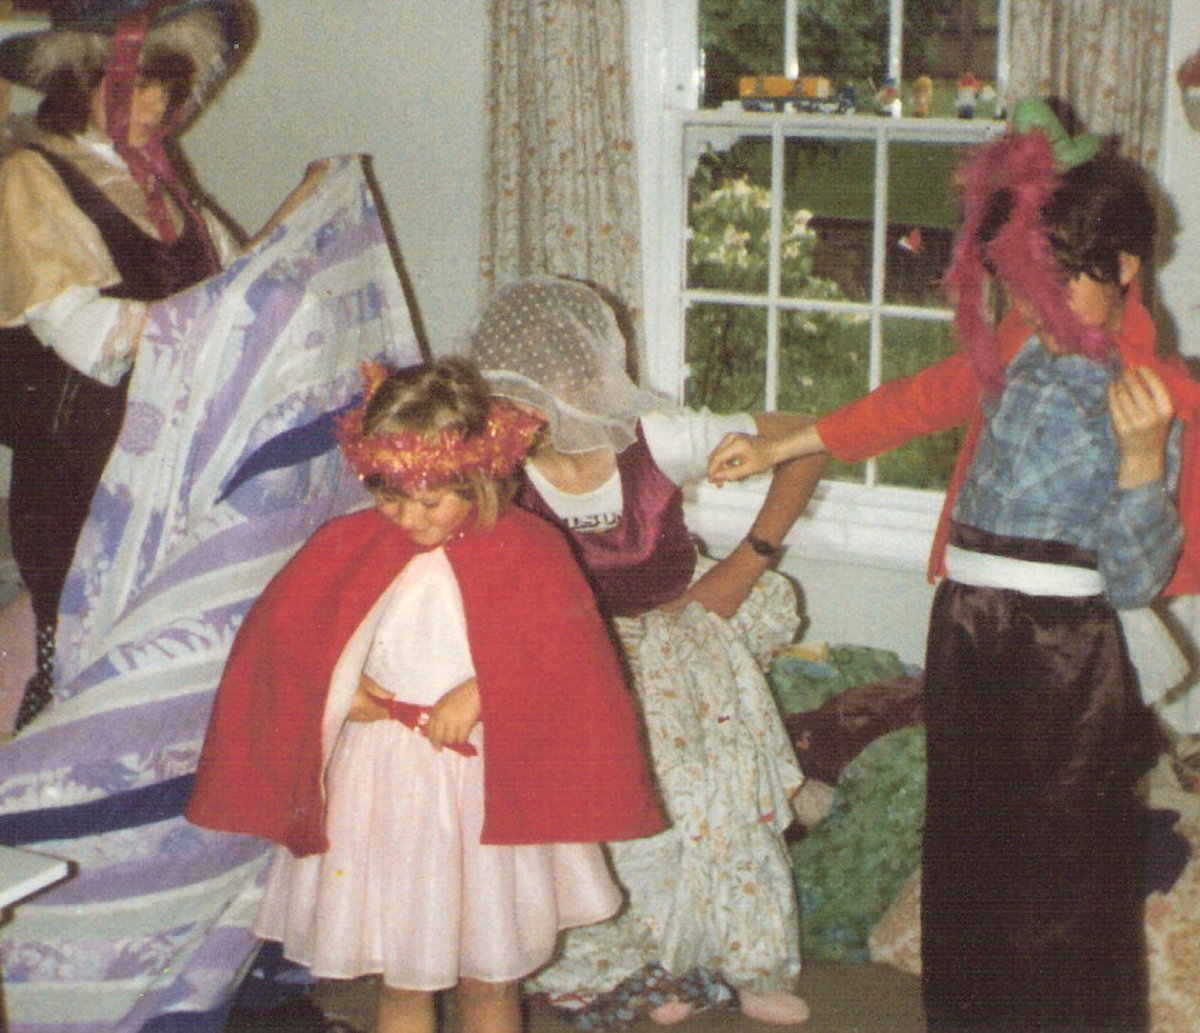 Dressing up was always great fun